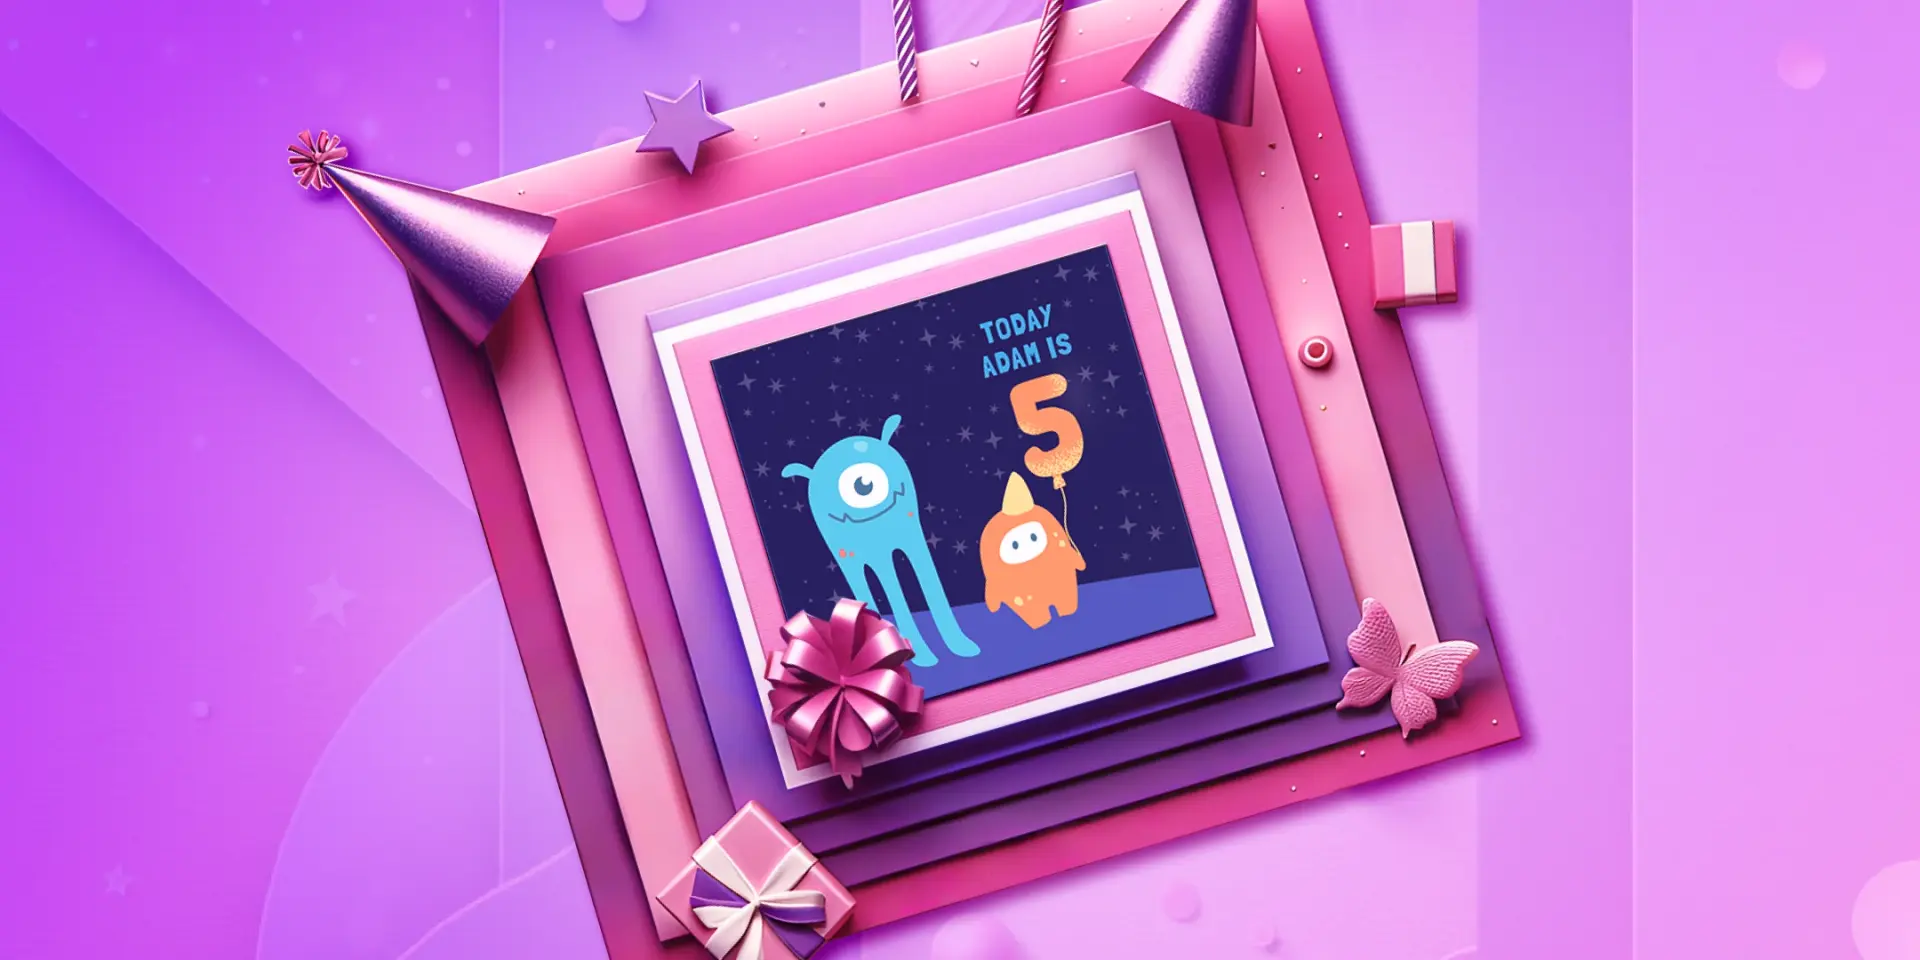 One of the featured birthday card templates in a stylized frame surrounded by party-themed 3D graphics